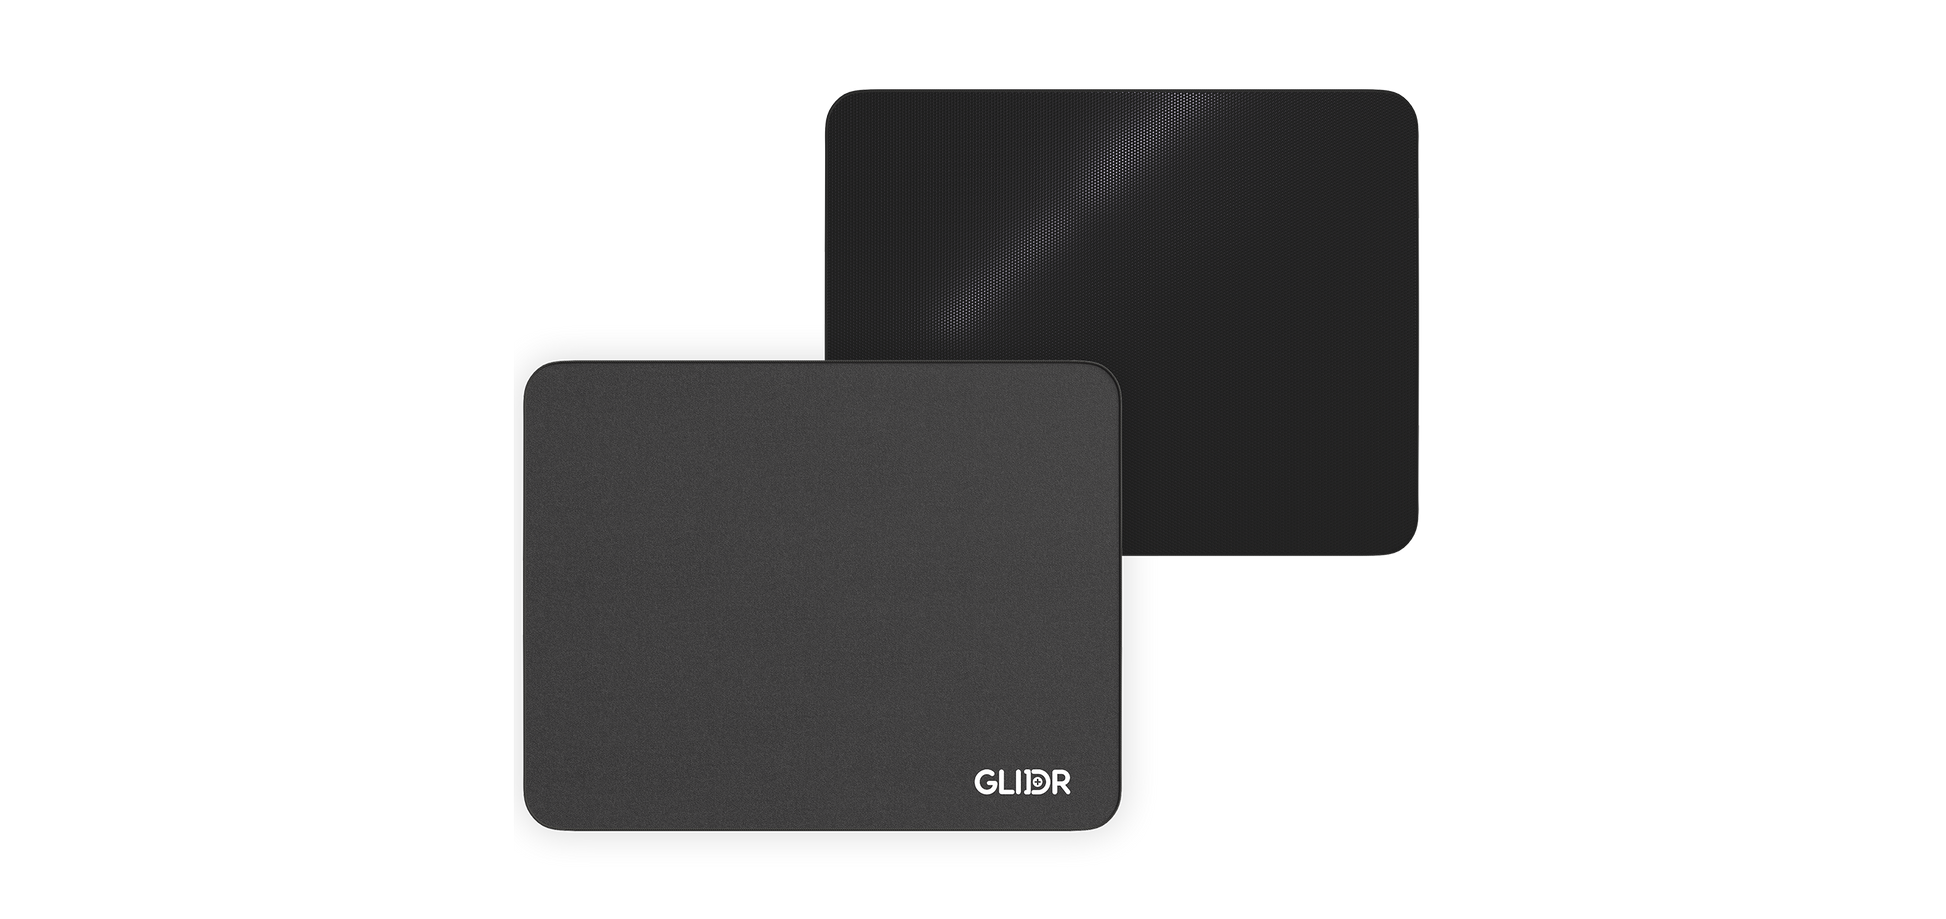 Goldtouch GT5-0017 Gel Filled Round Mouse Pad for EasyLift Desk